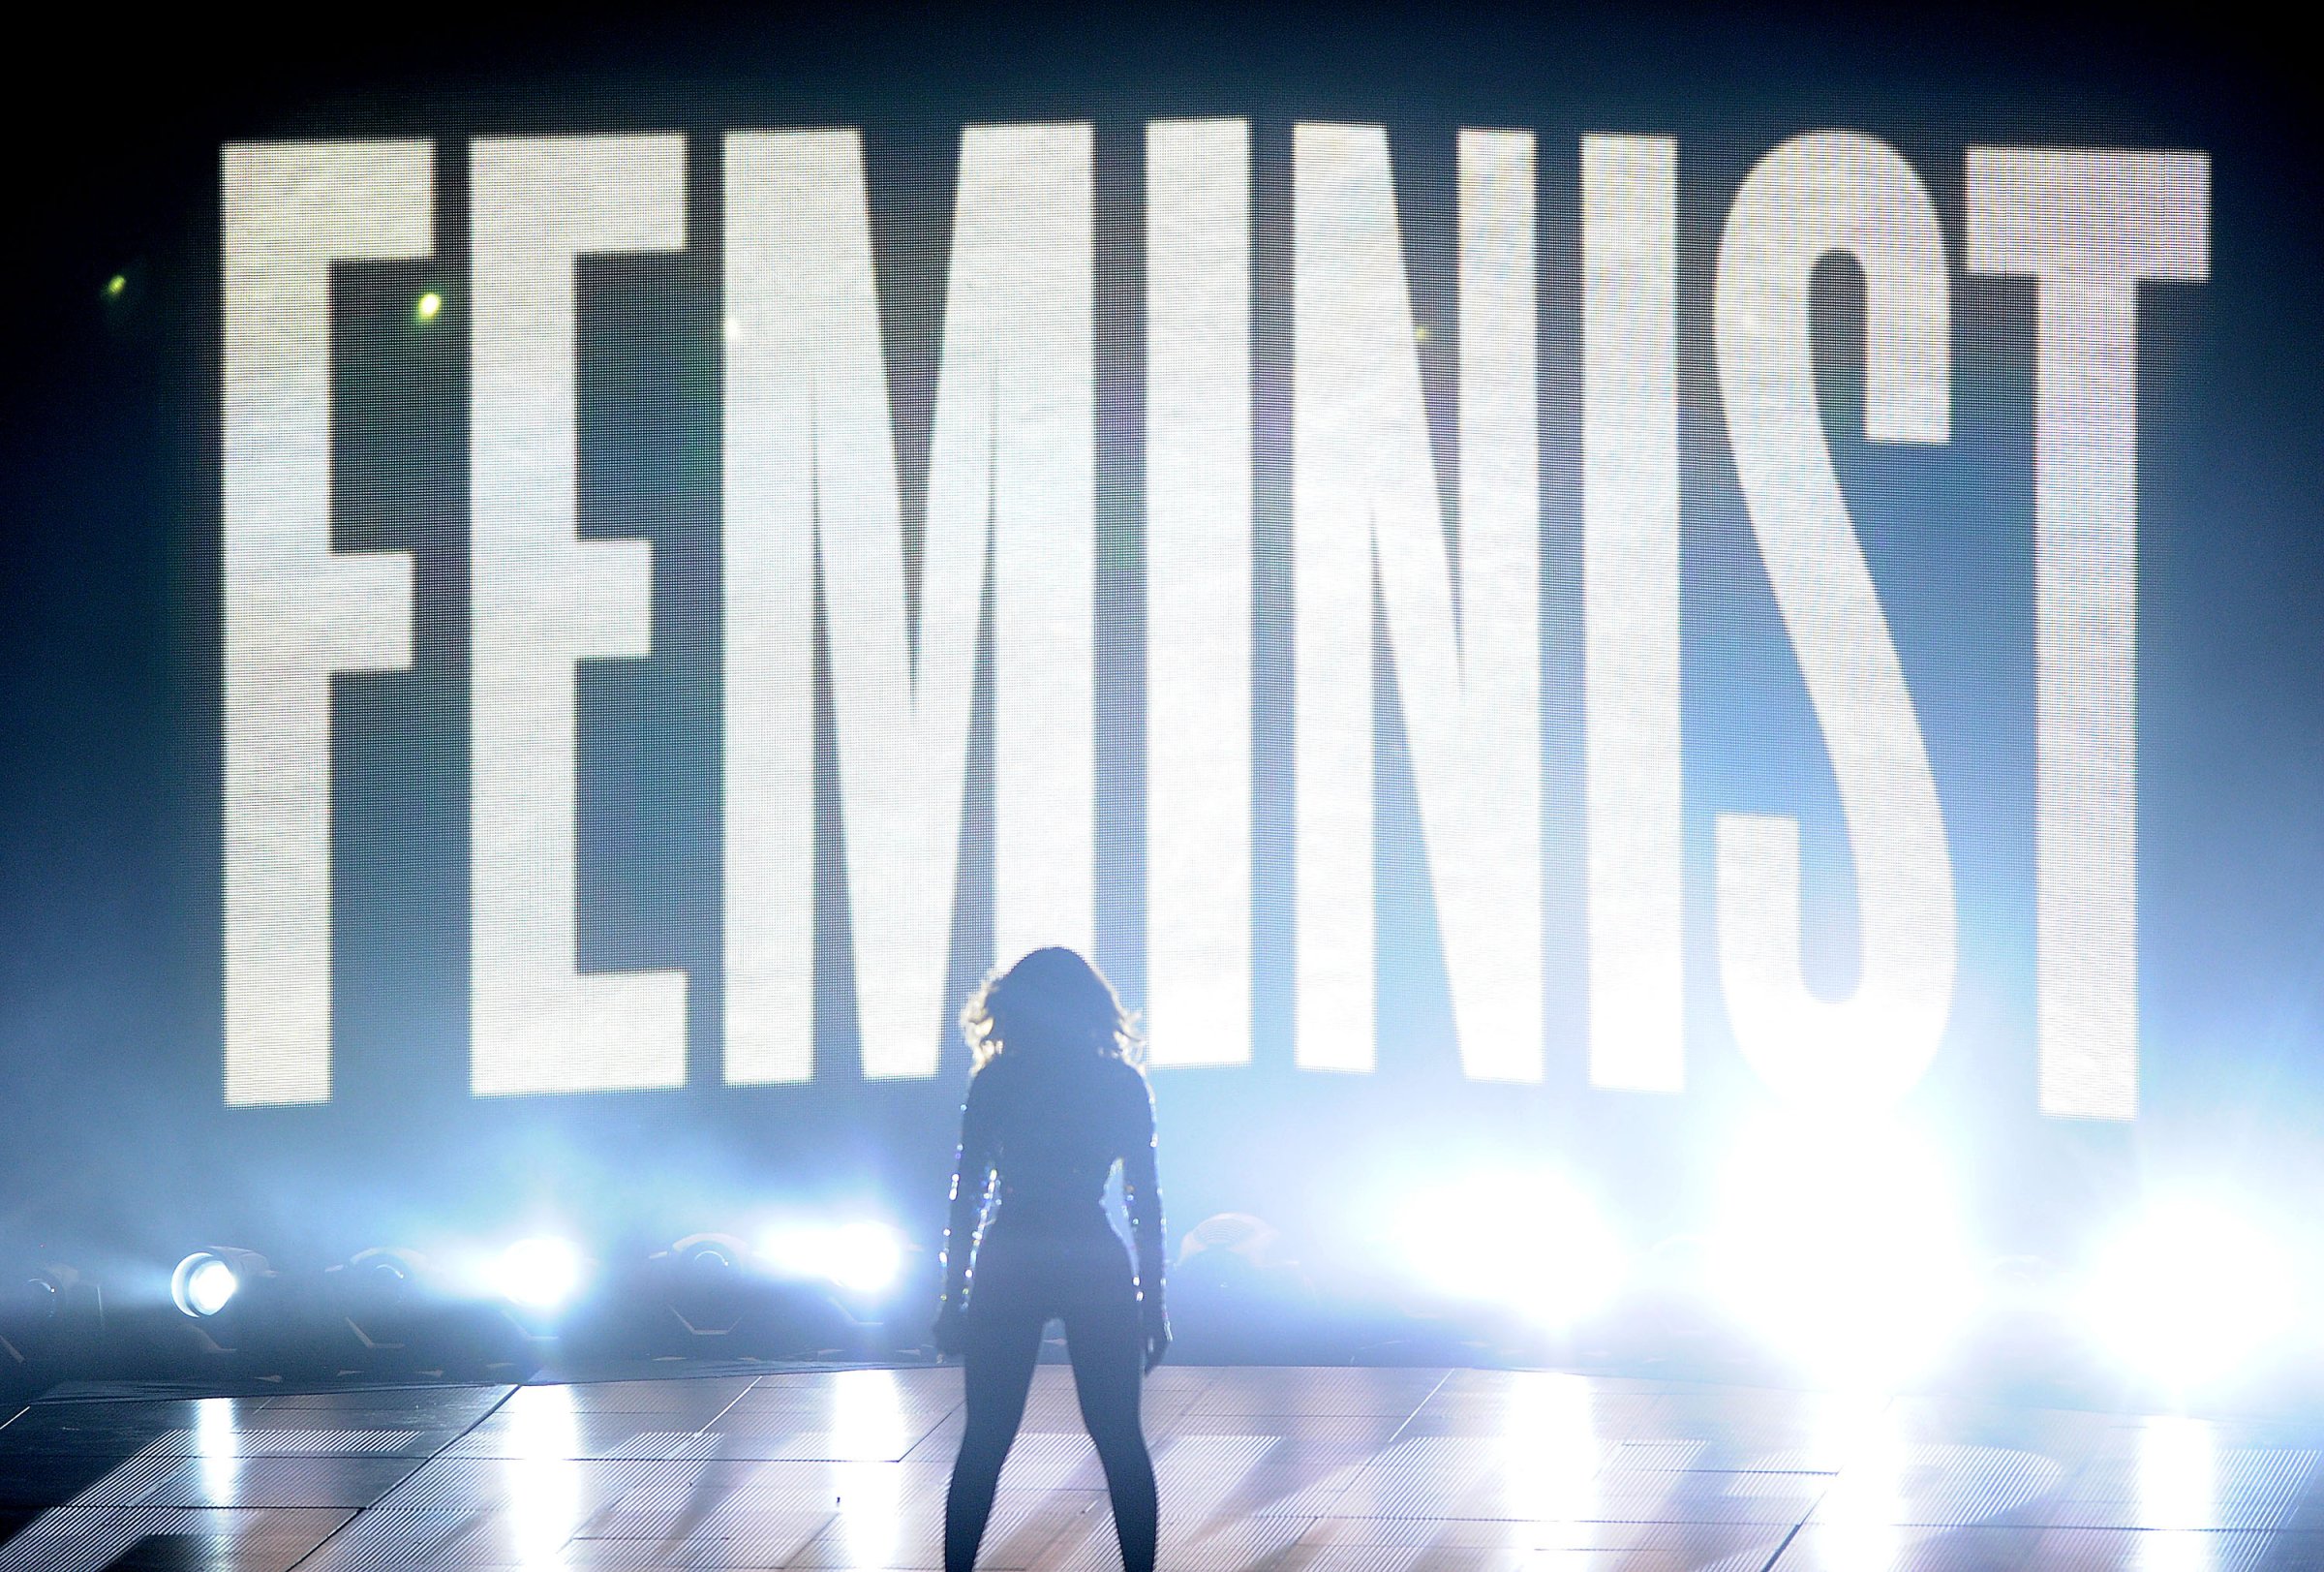 Beyonce performs onstage at the 2014 MTV Video Music Awards at The Forum on August 24, 2014 in Inglewood, Calif.